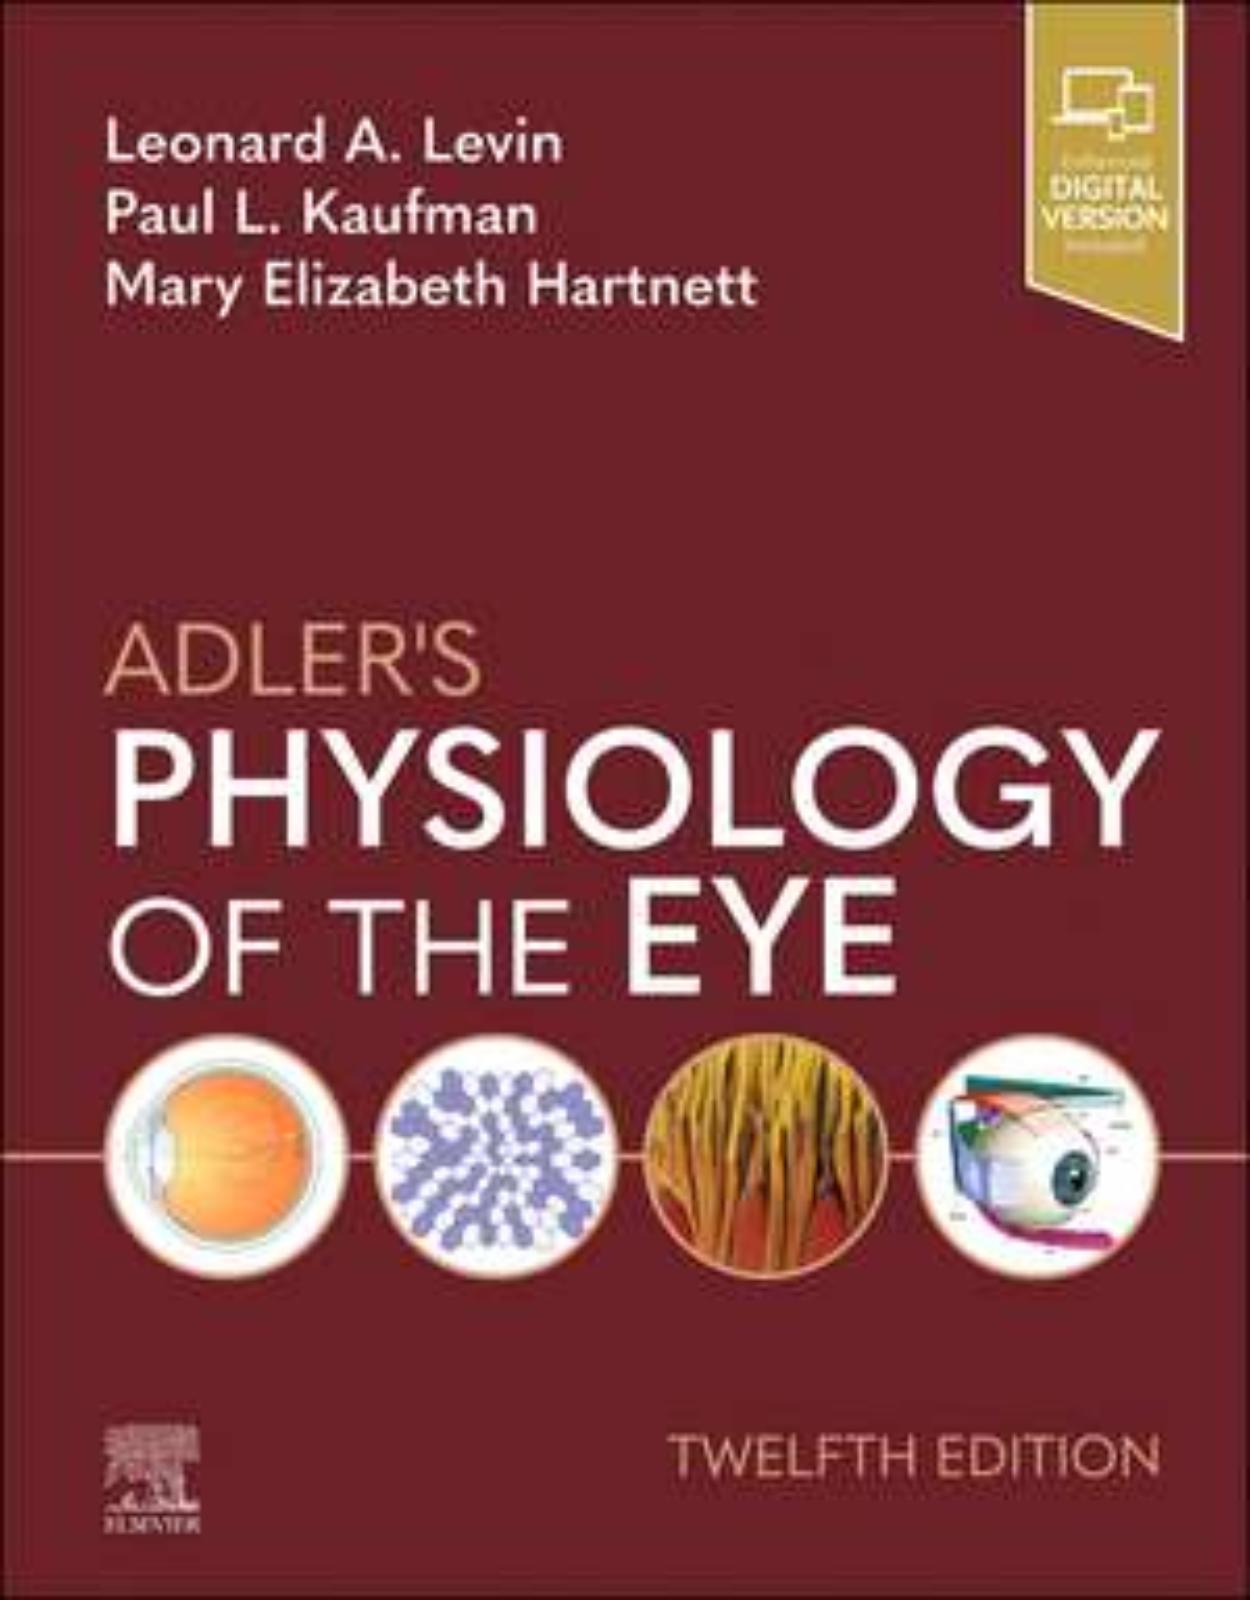 Adler’s Physiology of the Eye, 12th Edition